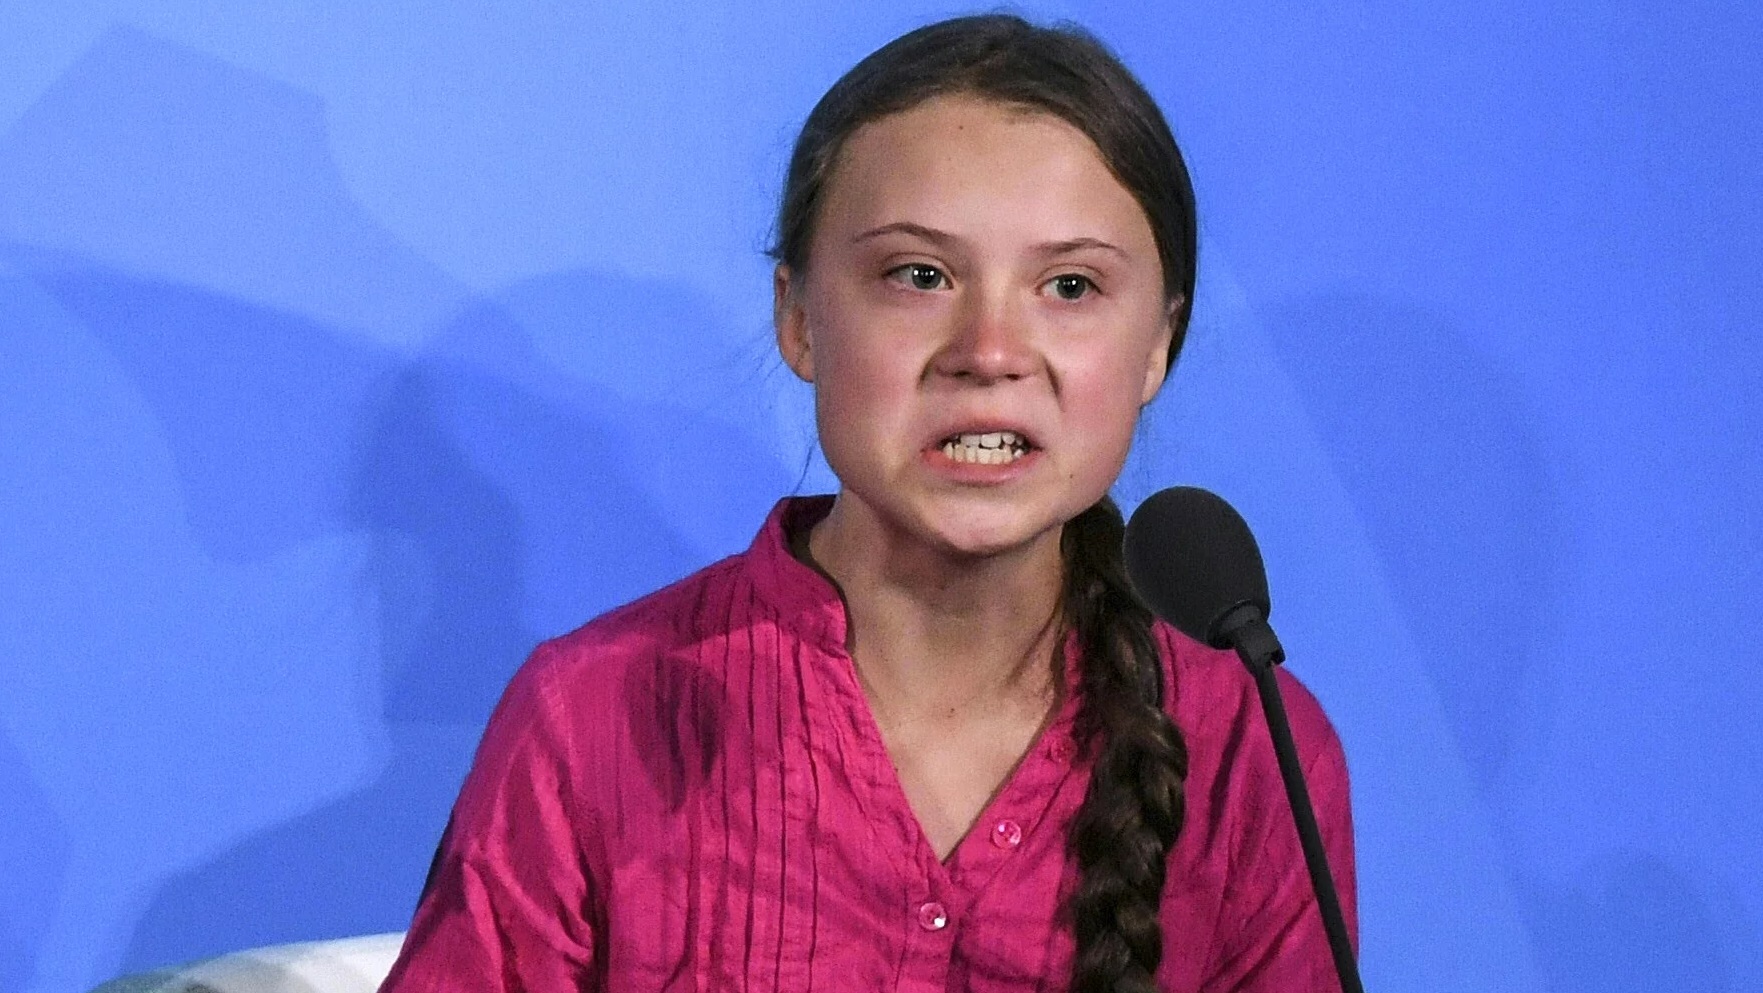 Enviro-tyrant Greta Thunberg wins TIME Person of the Year, joining Hitler, Stalin, and Obama